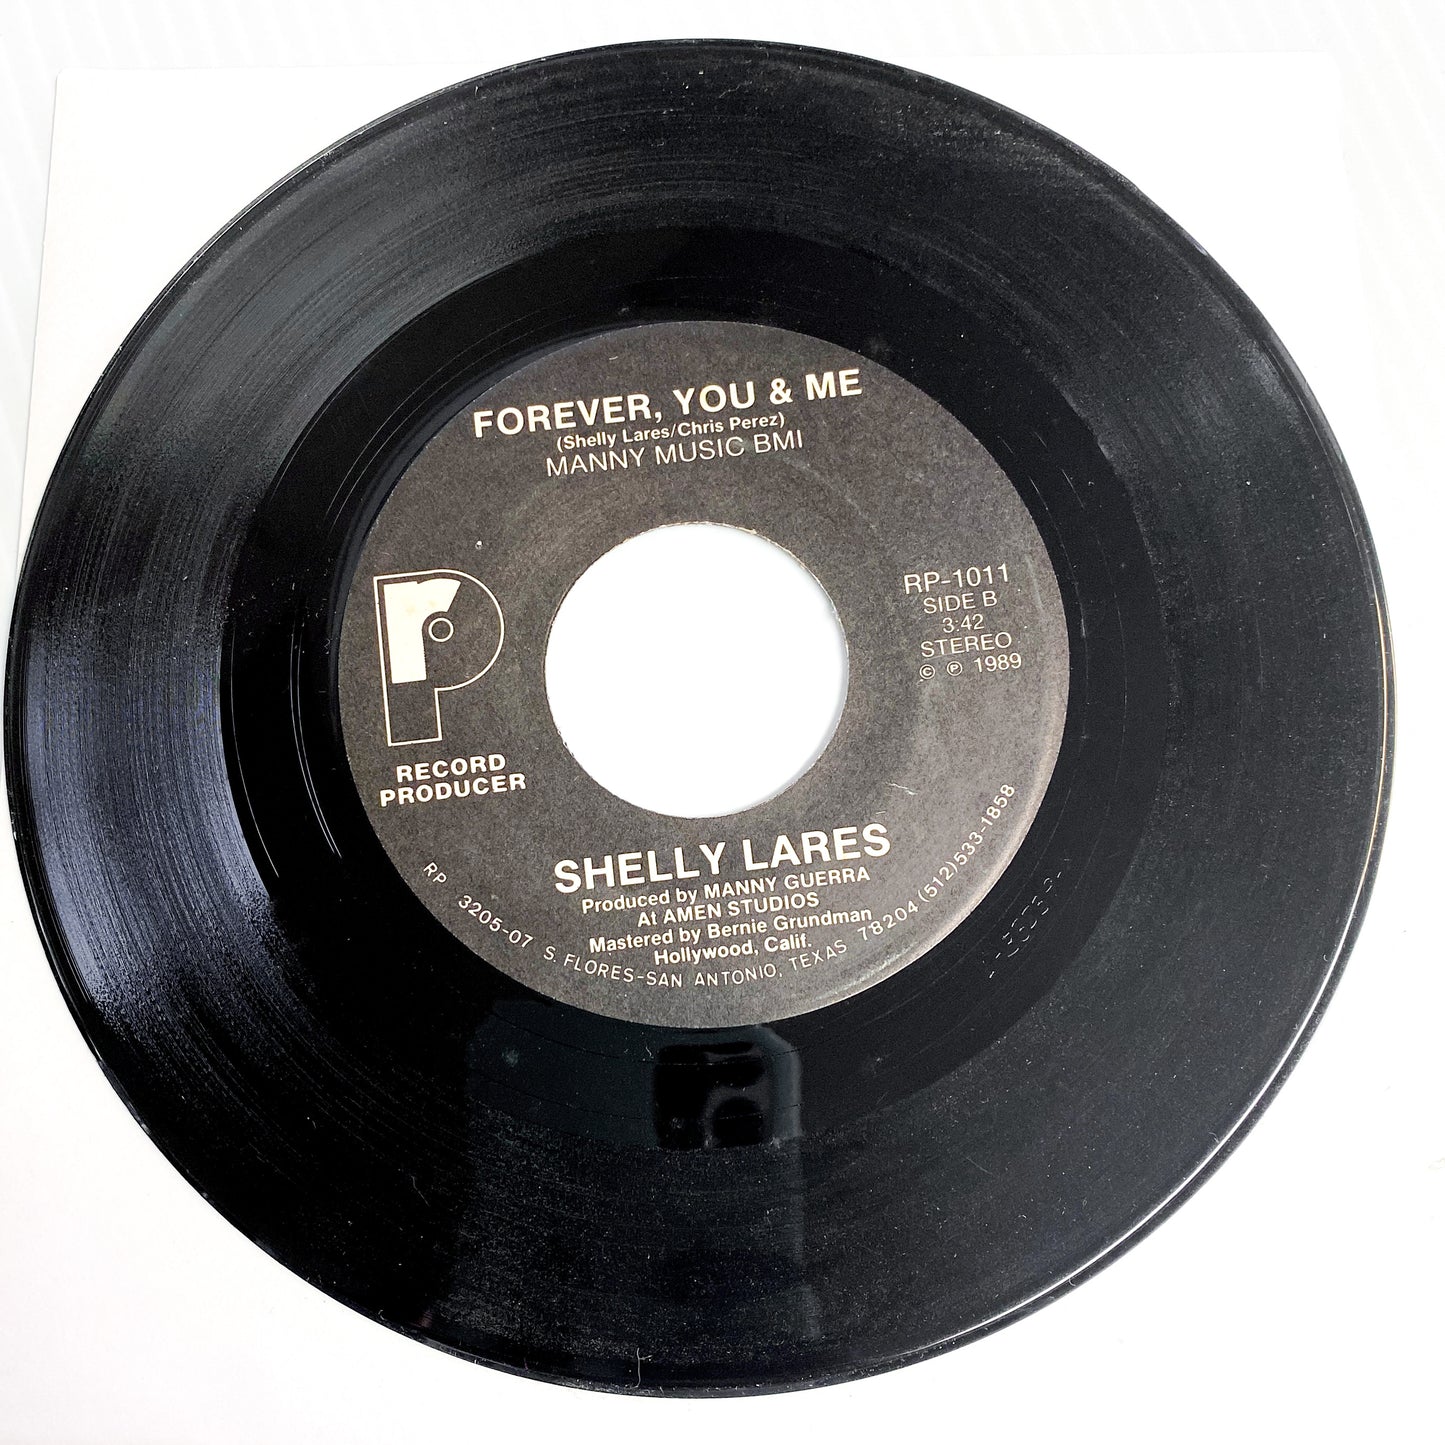 Shelly Lares - I'm Over You / Forever, You & Me (Previously Owned 45 RPM)